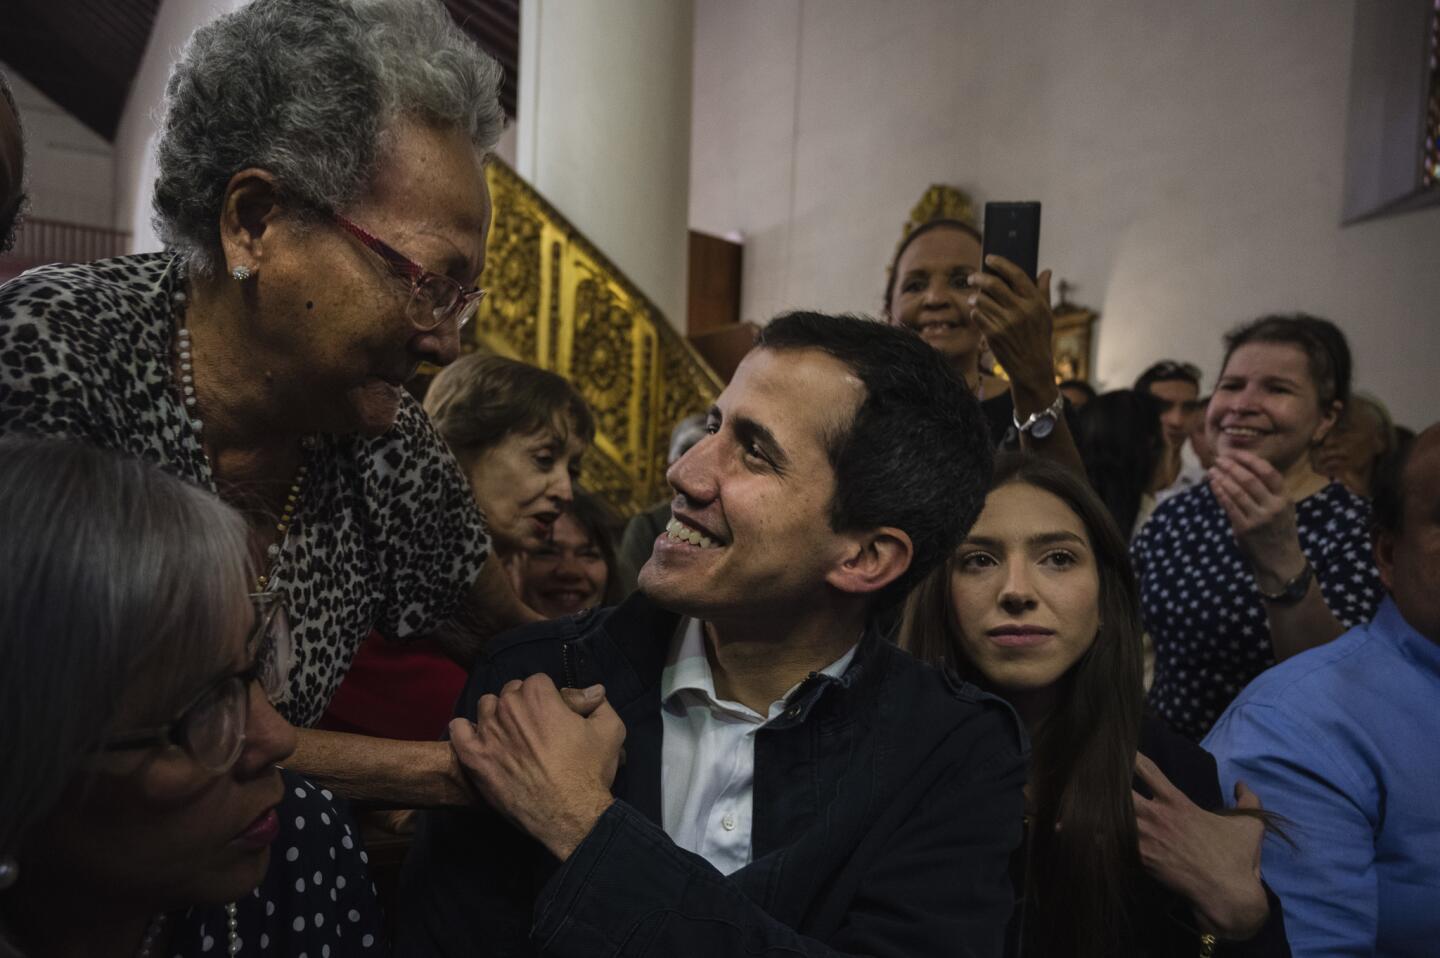 Opposition leader Juan Guaido and his family attend a Mass in honor of Venezuelans killed during the protests in Caracas, Venezuela, on Jan. 27.